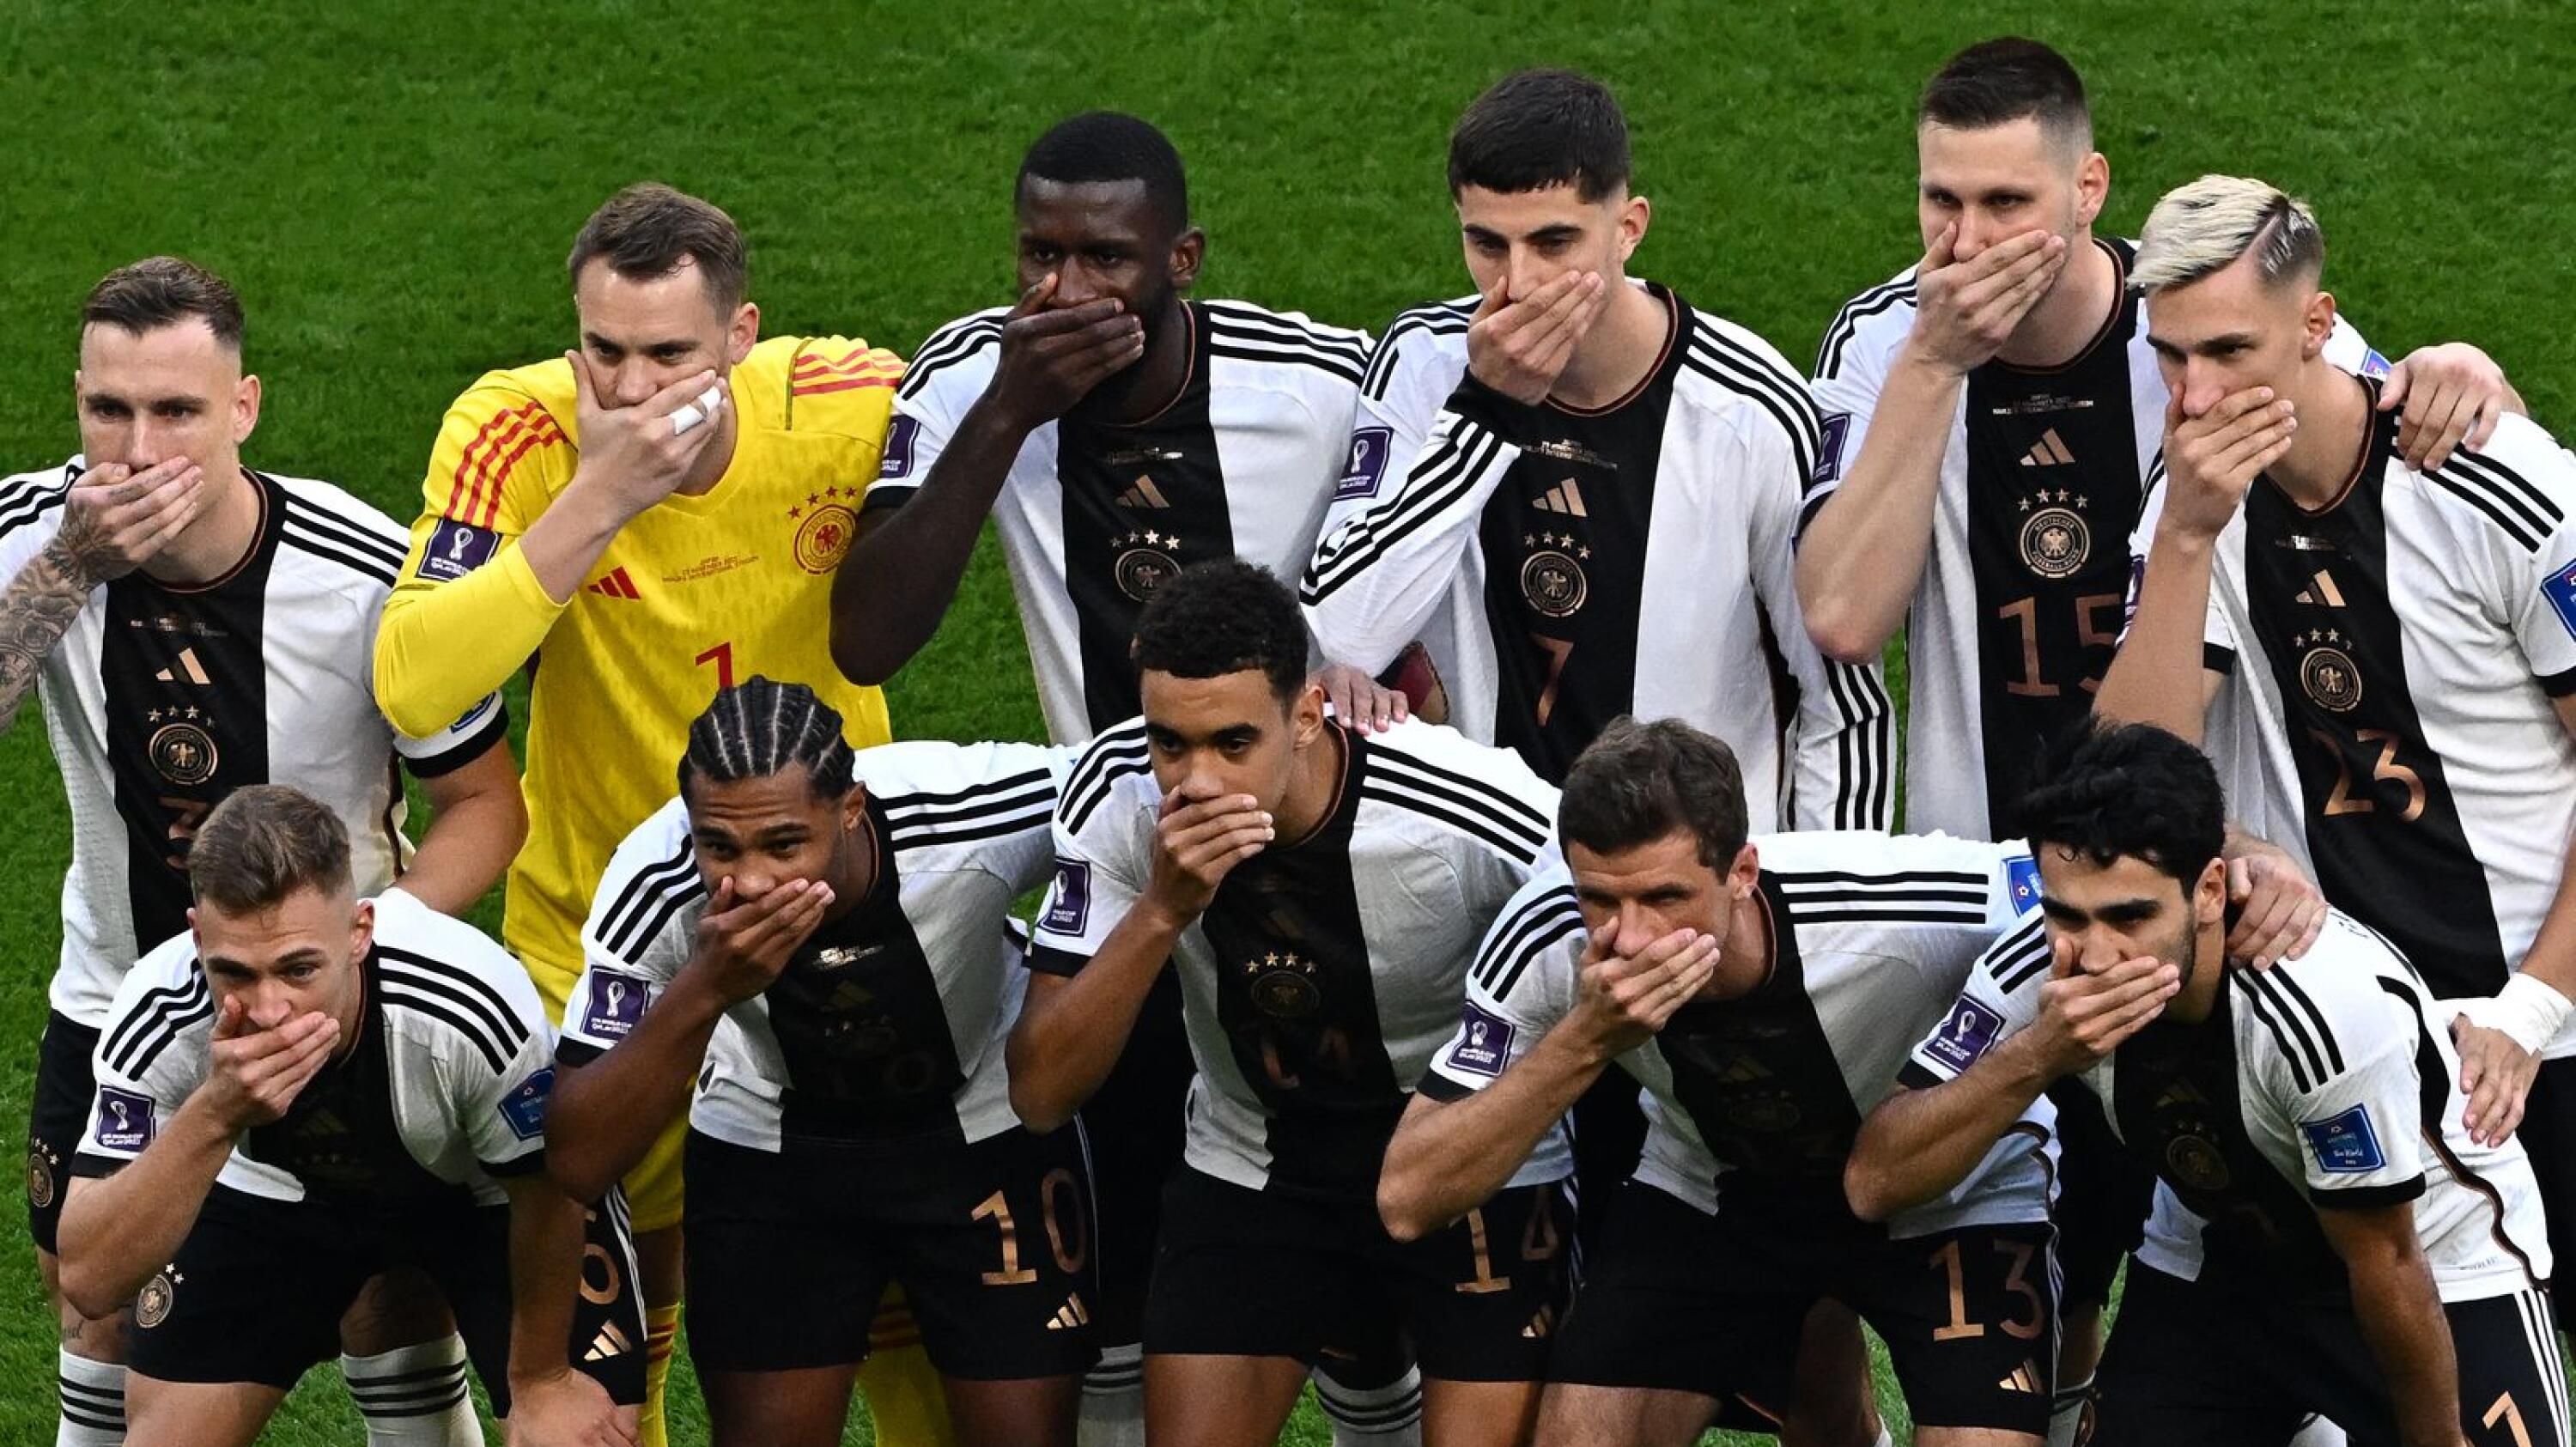 Germany's players cover their mouths as they pose for a group picture ahead of their Qatar 2022 World Cup Group E football match against Japan at the Khalifa International Stadium in Doha on Wednesday